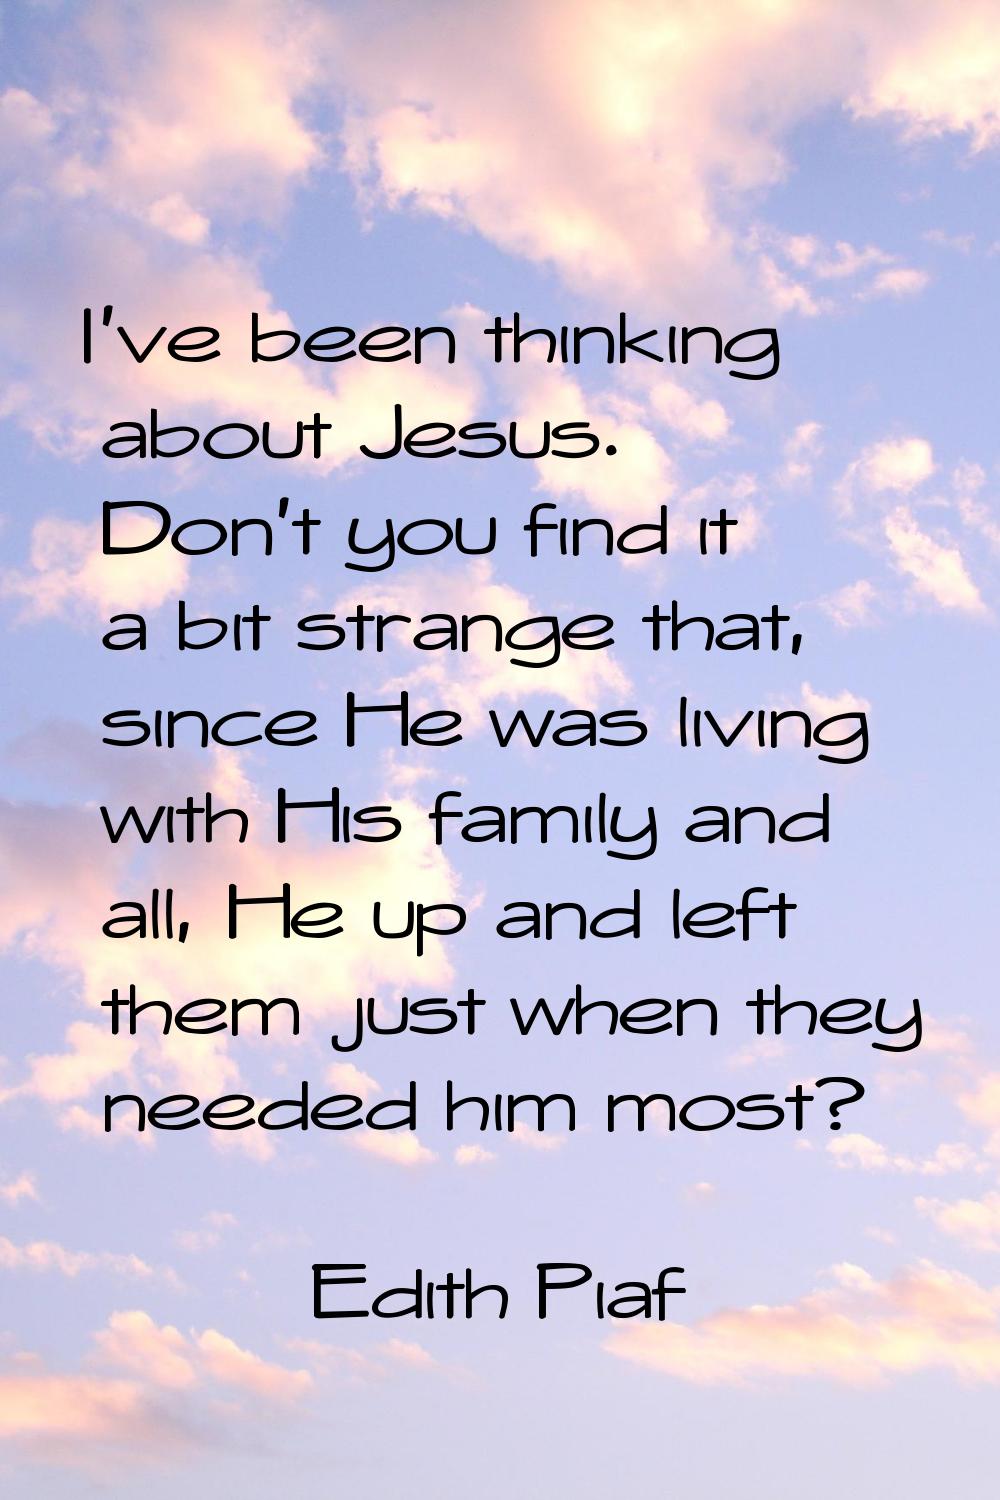 I've been thinking about Jesus. Don't you find it a bit strange that, since He was living with His 